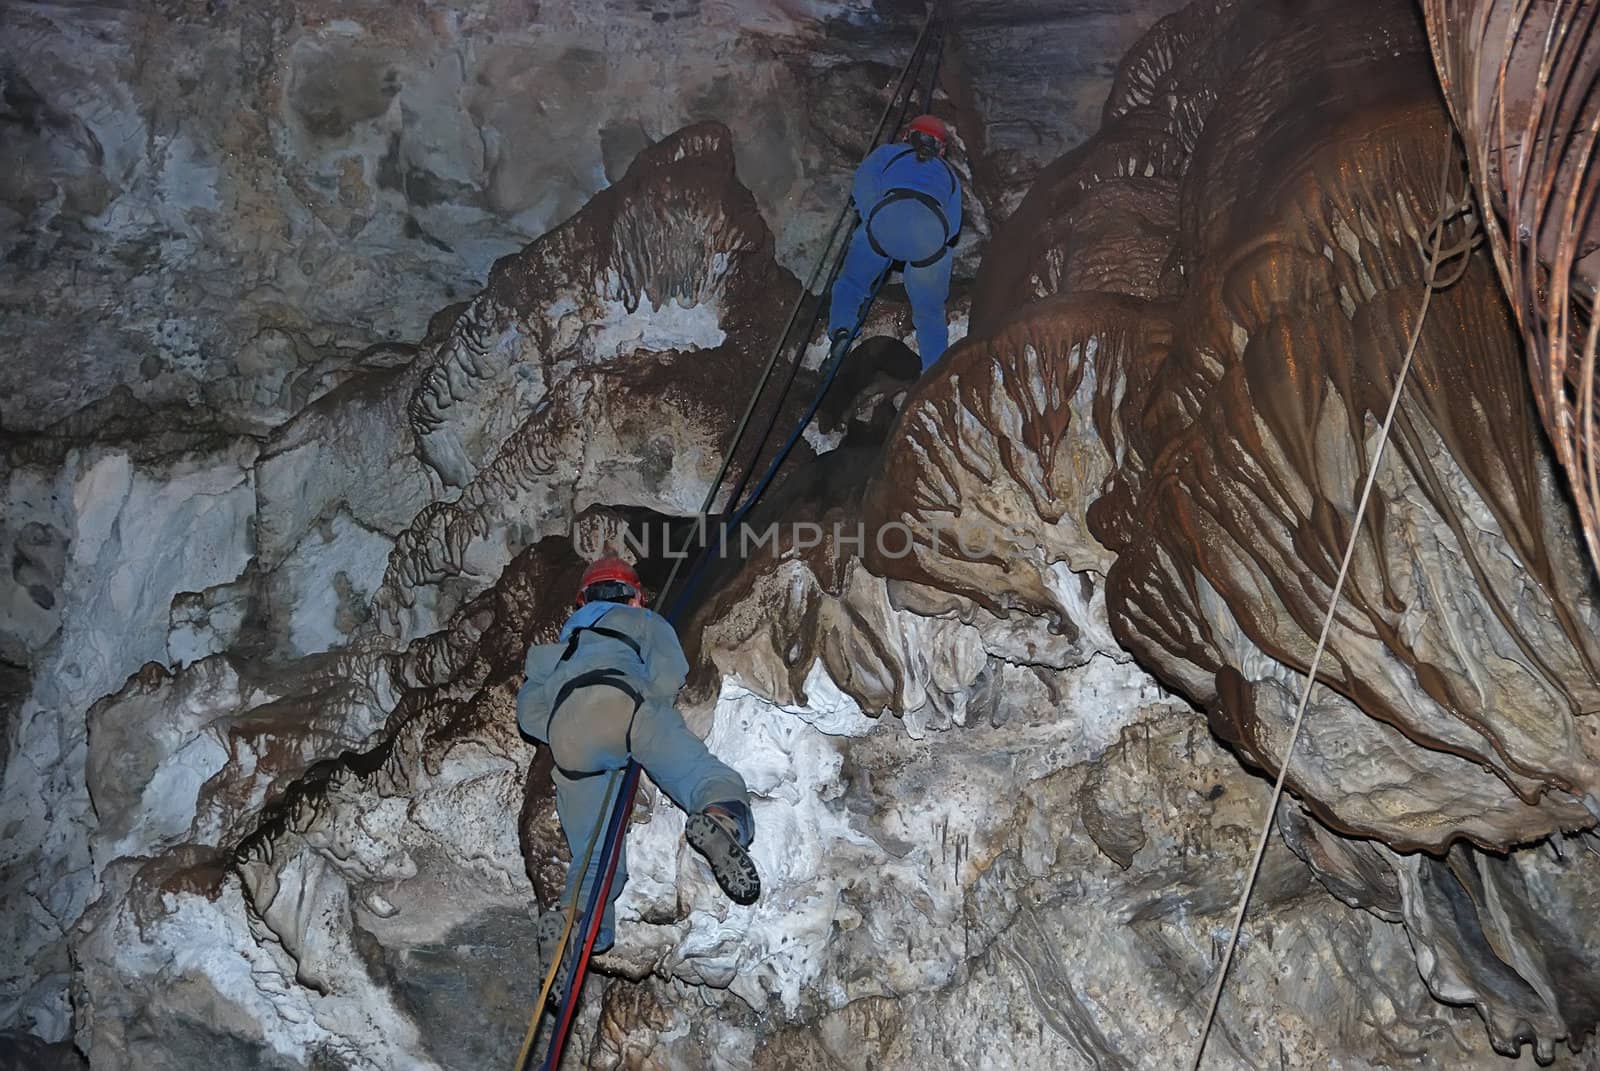 Two climbers on a rope in a cavern.